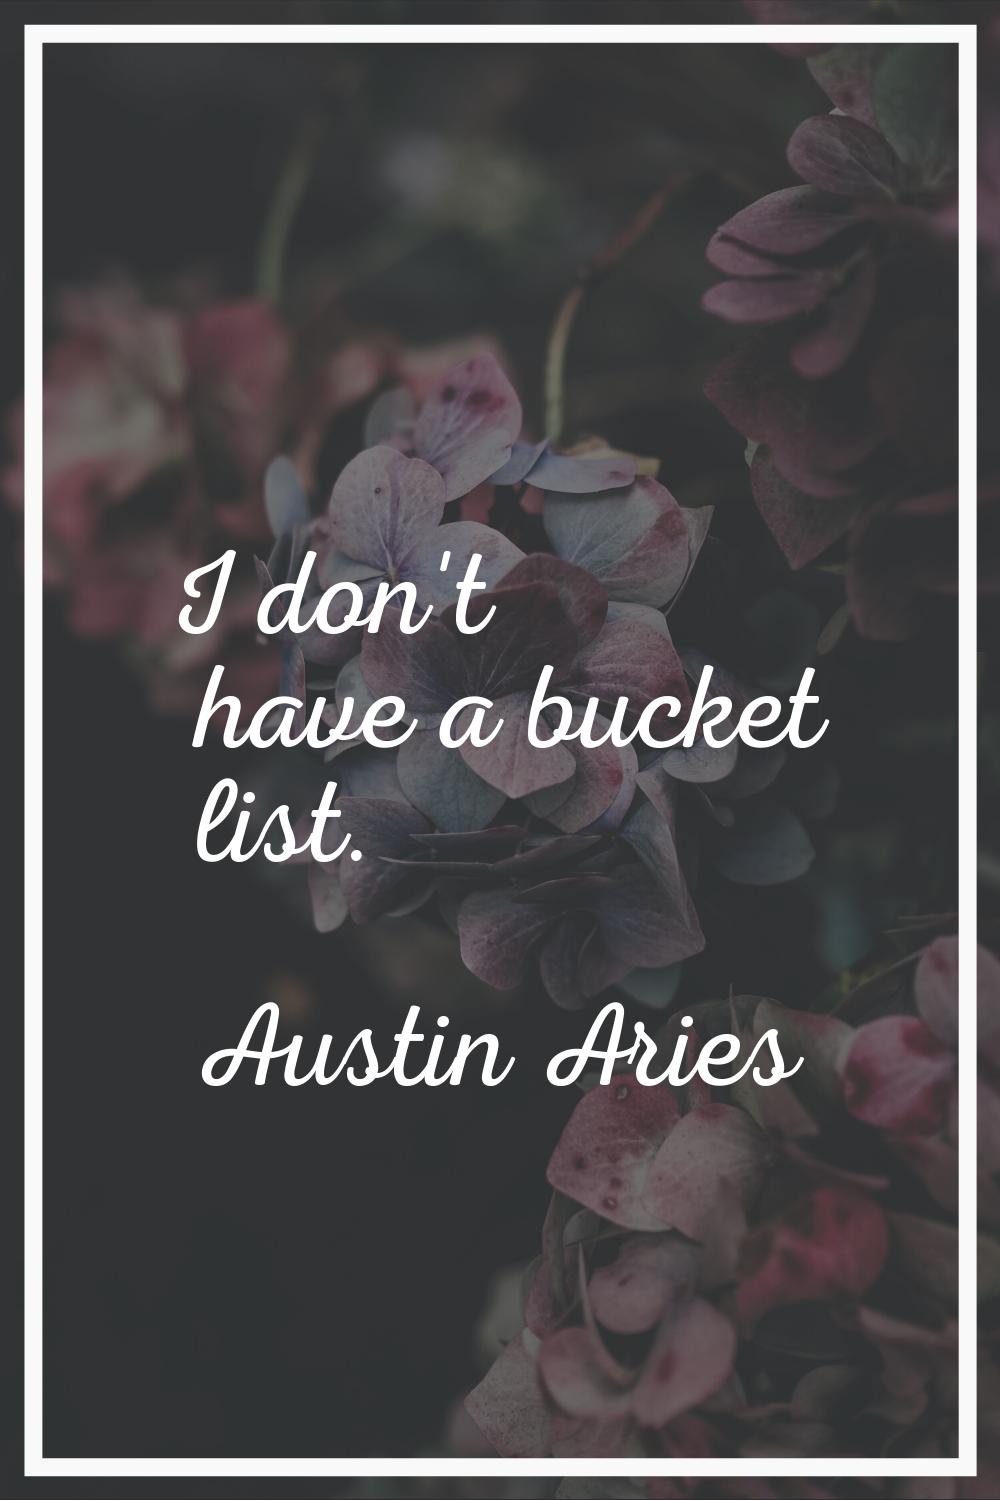 I don't have a bucket list.